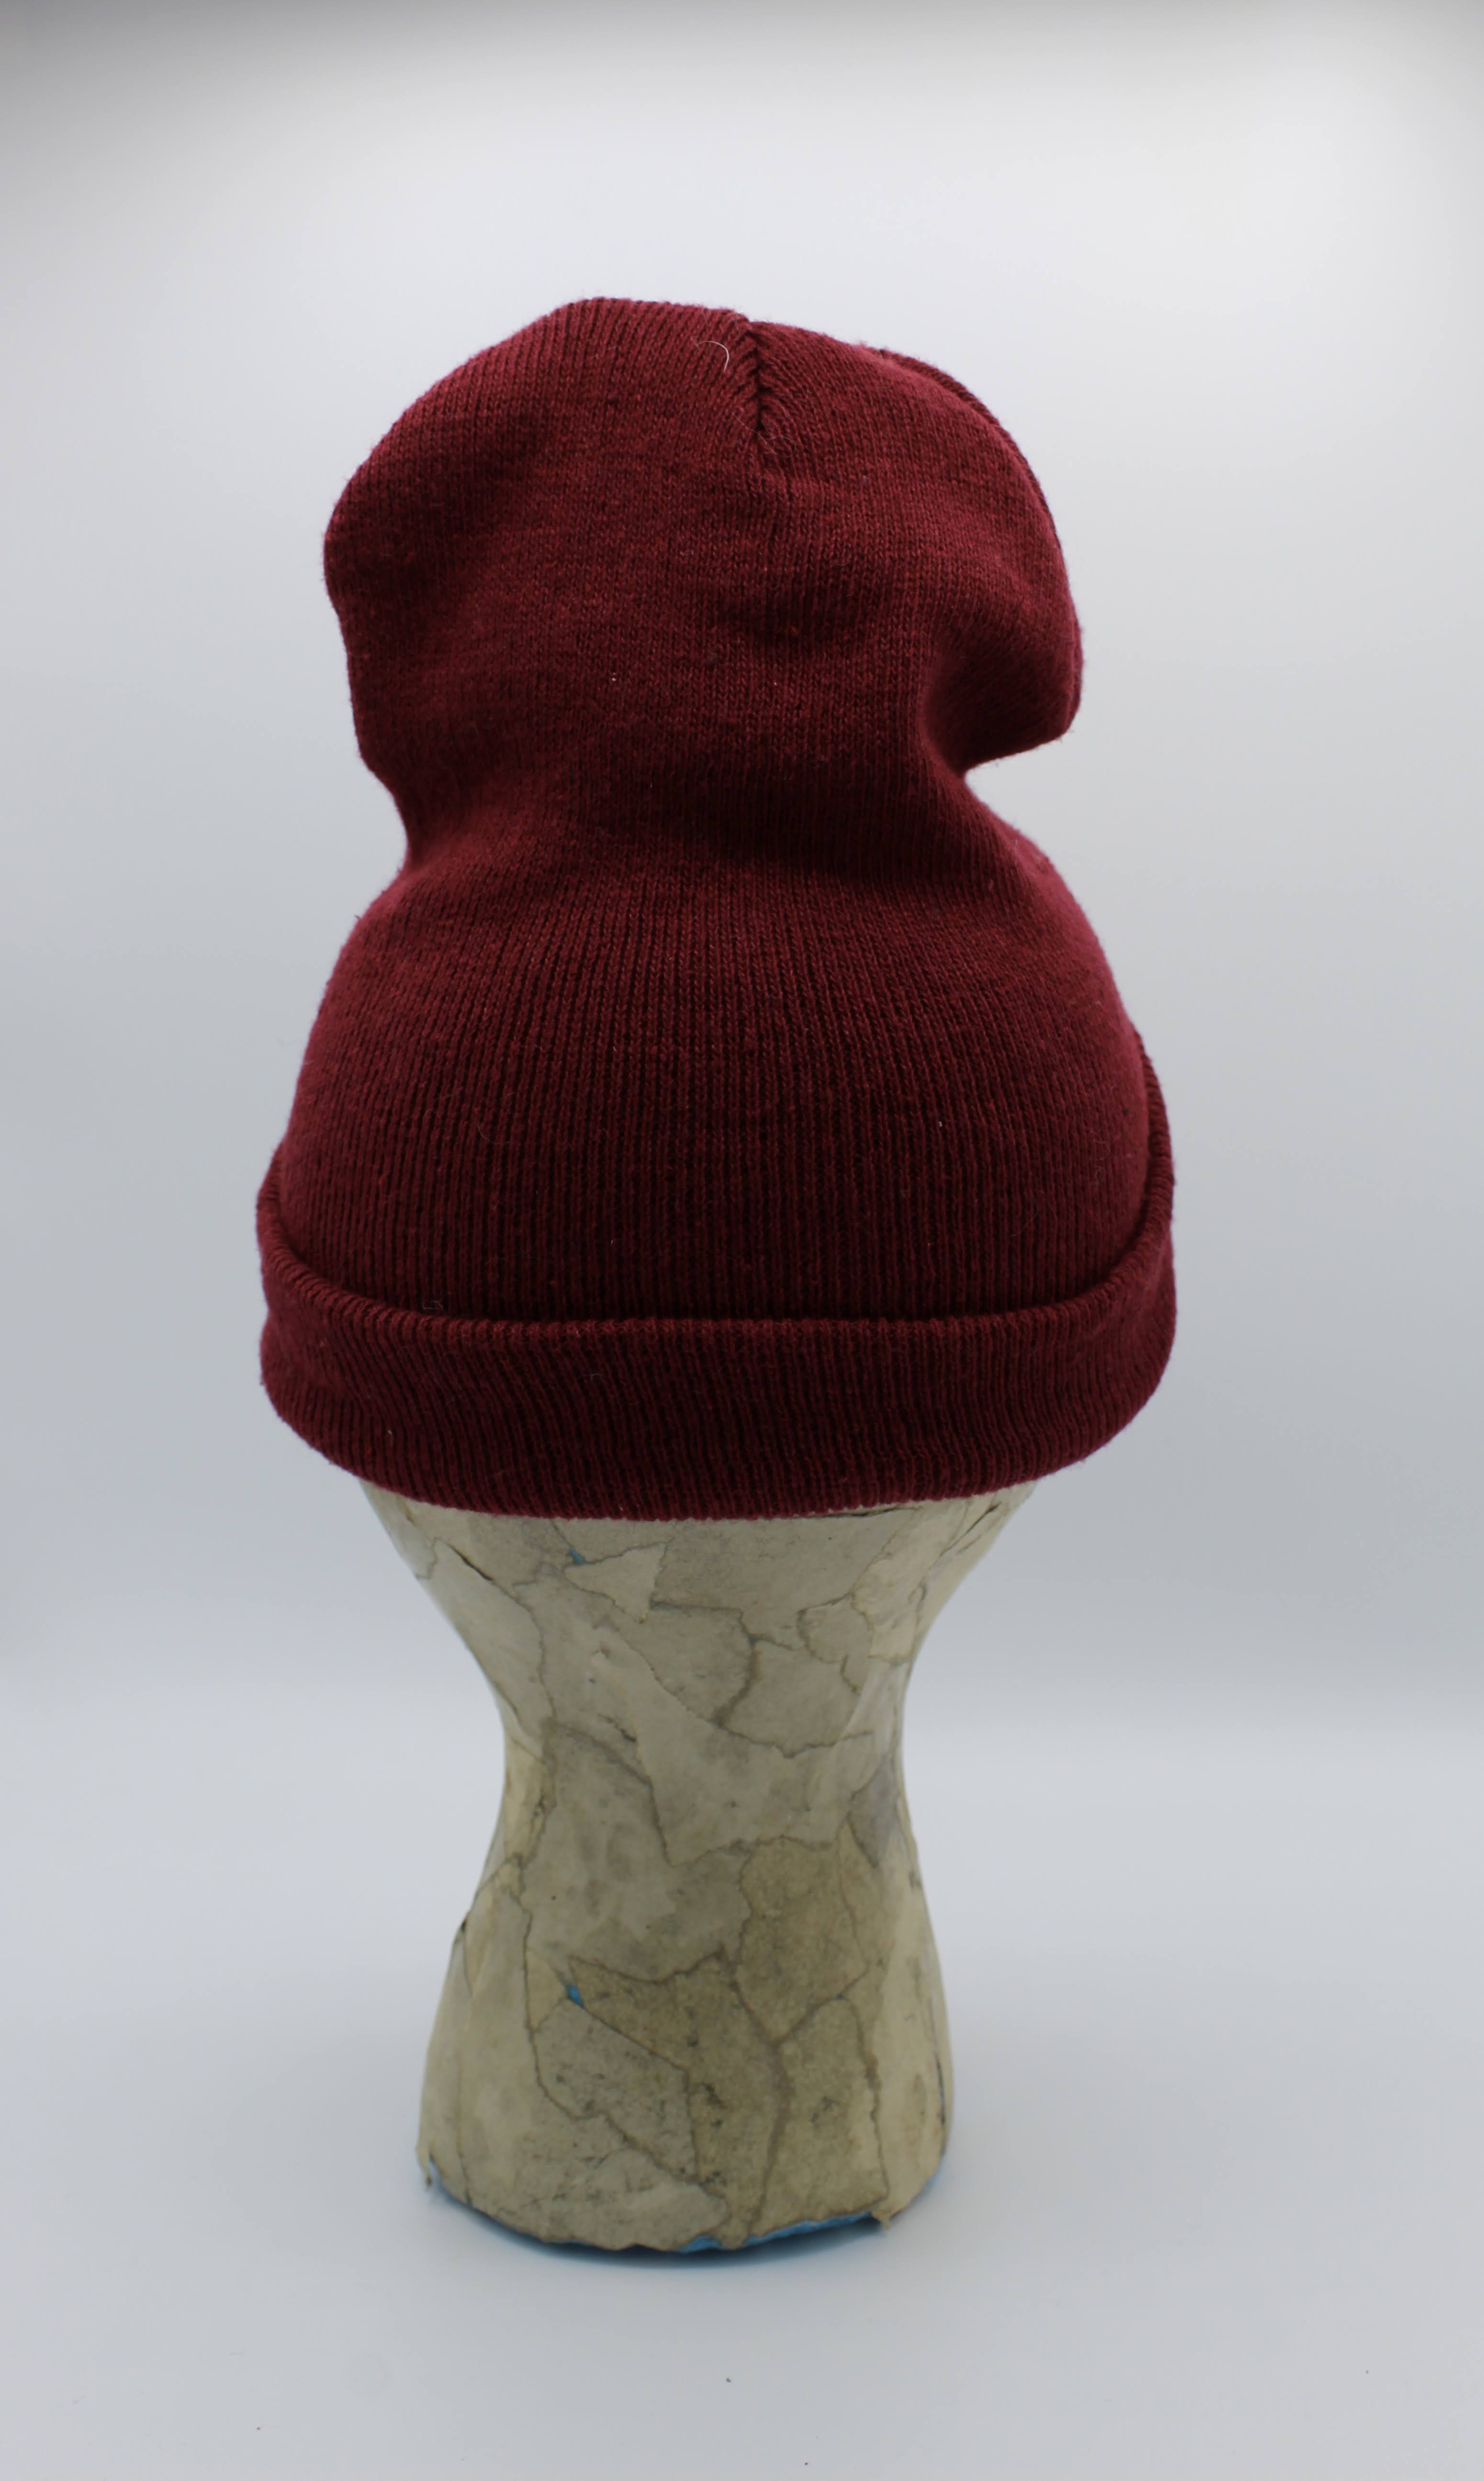 Maroon Beanie with Crocheted Blue Flower